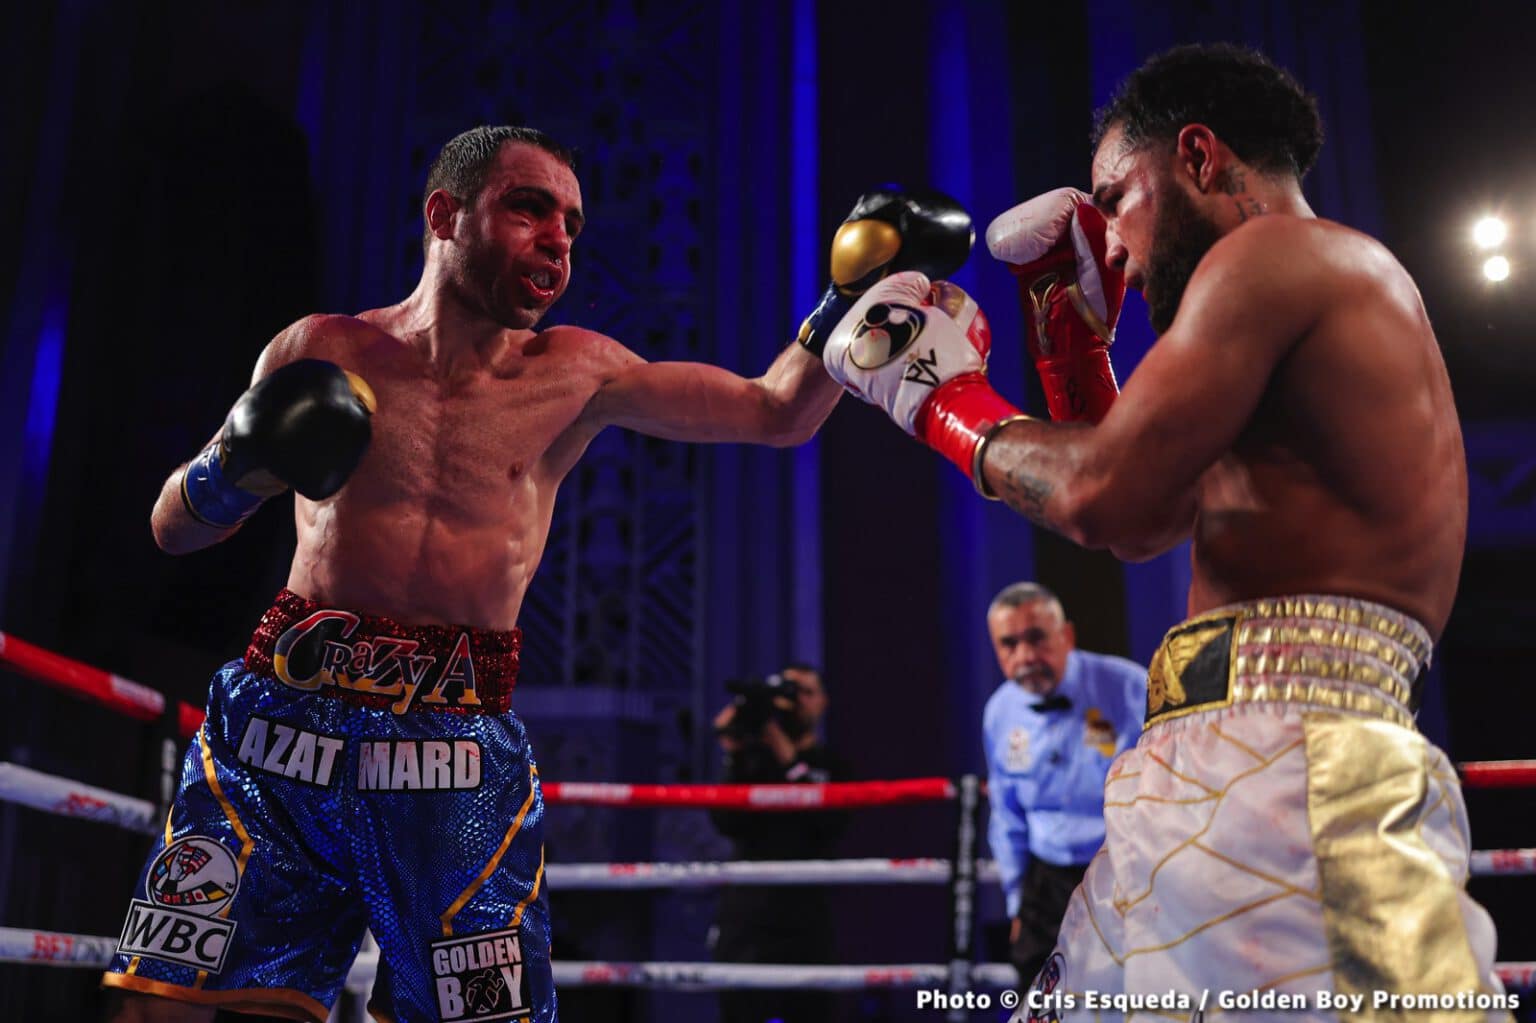 Pantera Nery Secures An 11th-Round KO Against Hovhannisyan - Boxing Results